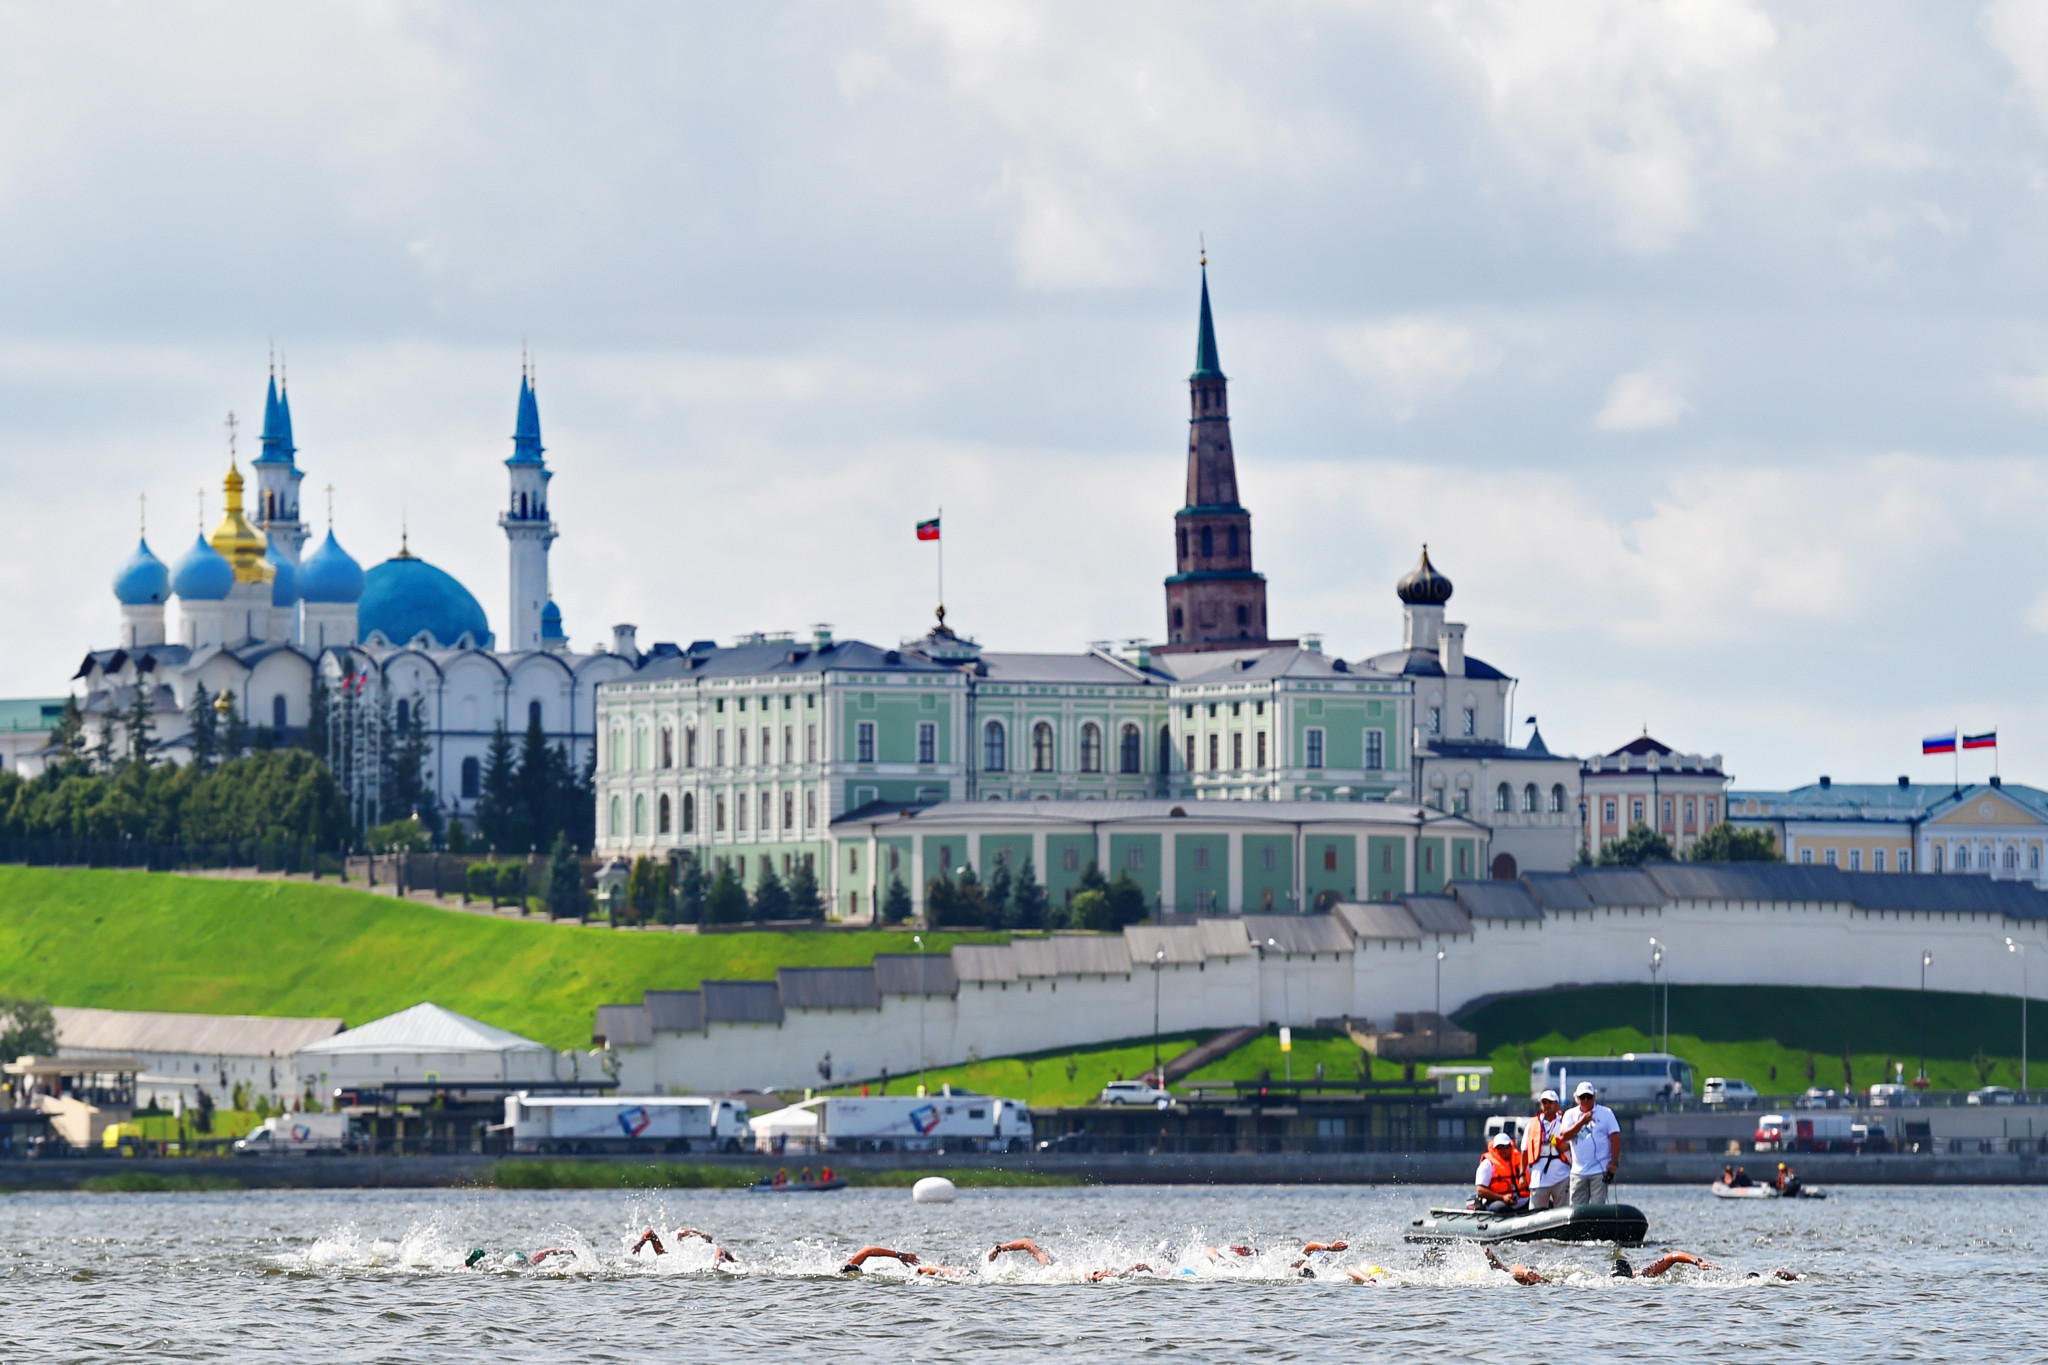 Kazan is interested in hosting an inaugural SCO Games ©Getty Images